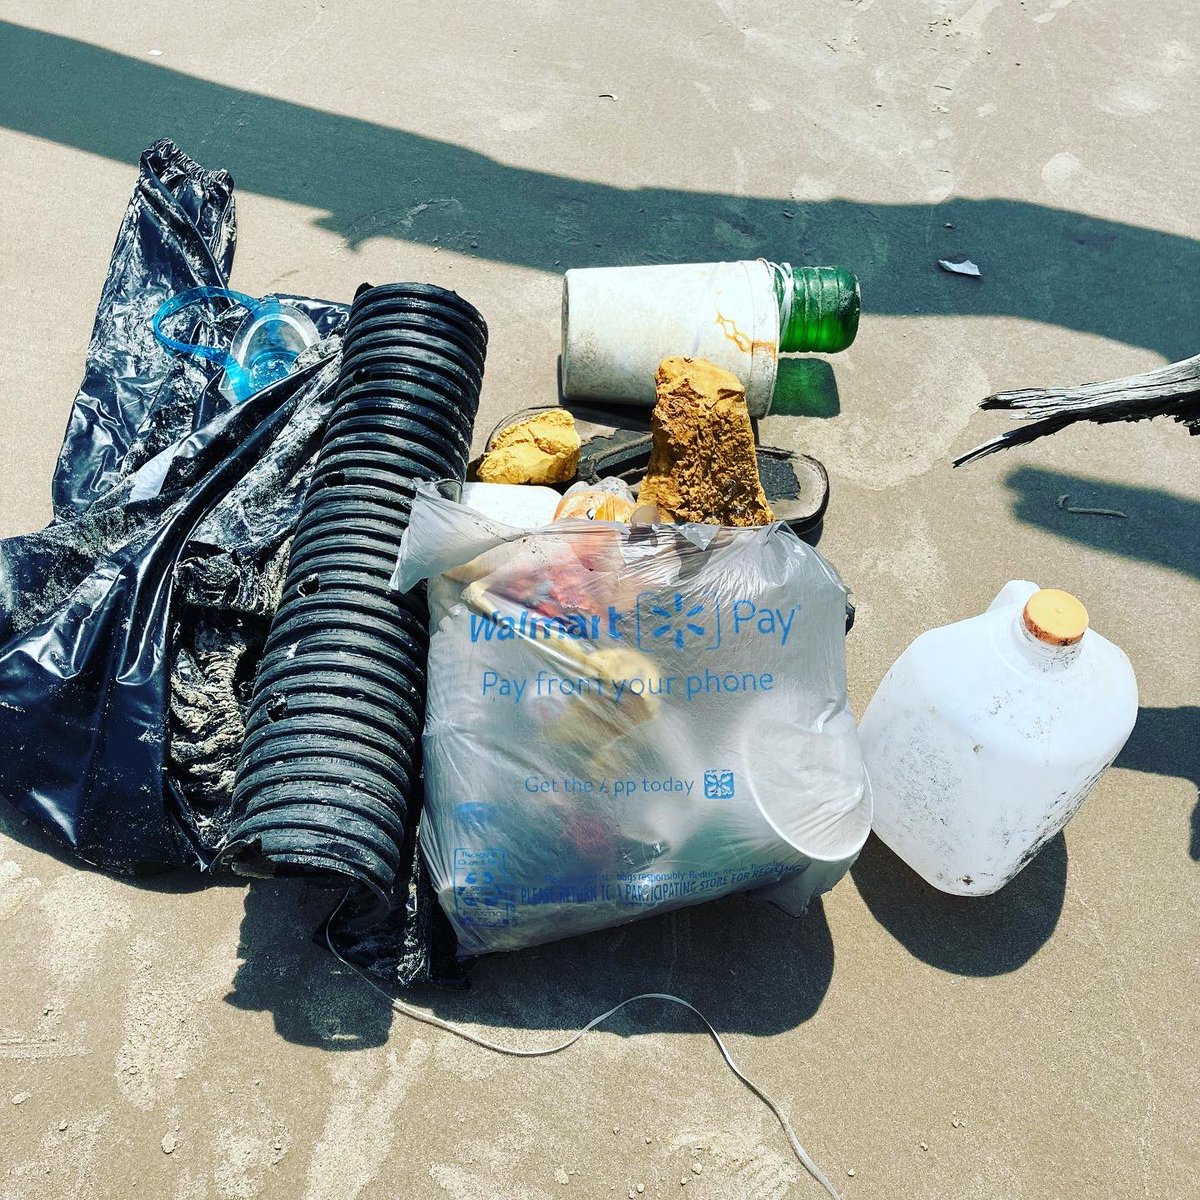 Did some exploring on #BoneyardBeach at #BigTalbotIsland.
Also picked up a _lot_ of trash on a two hour walk.
#DontLitter #CleanUpAfterYourself #ProtectTheOcean #KeepTheBeachClean